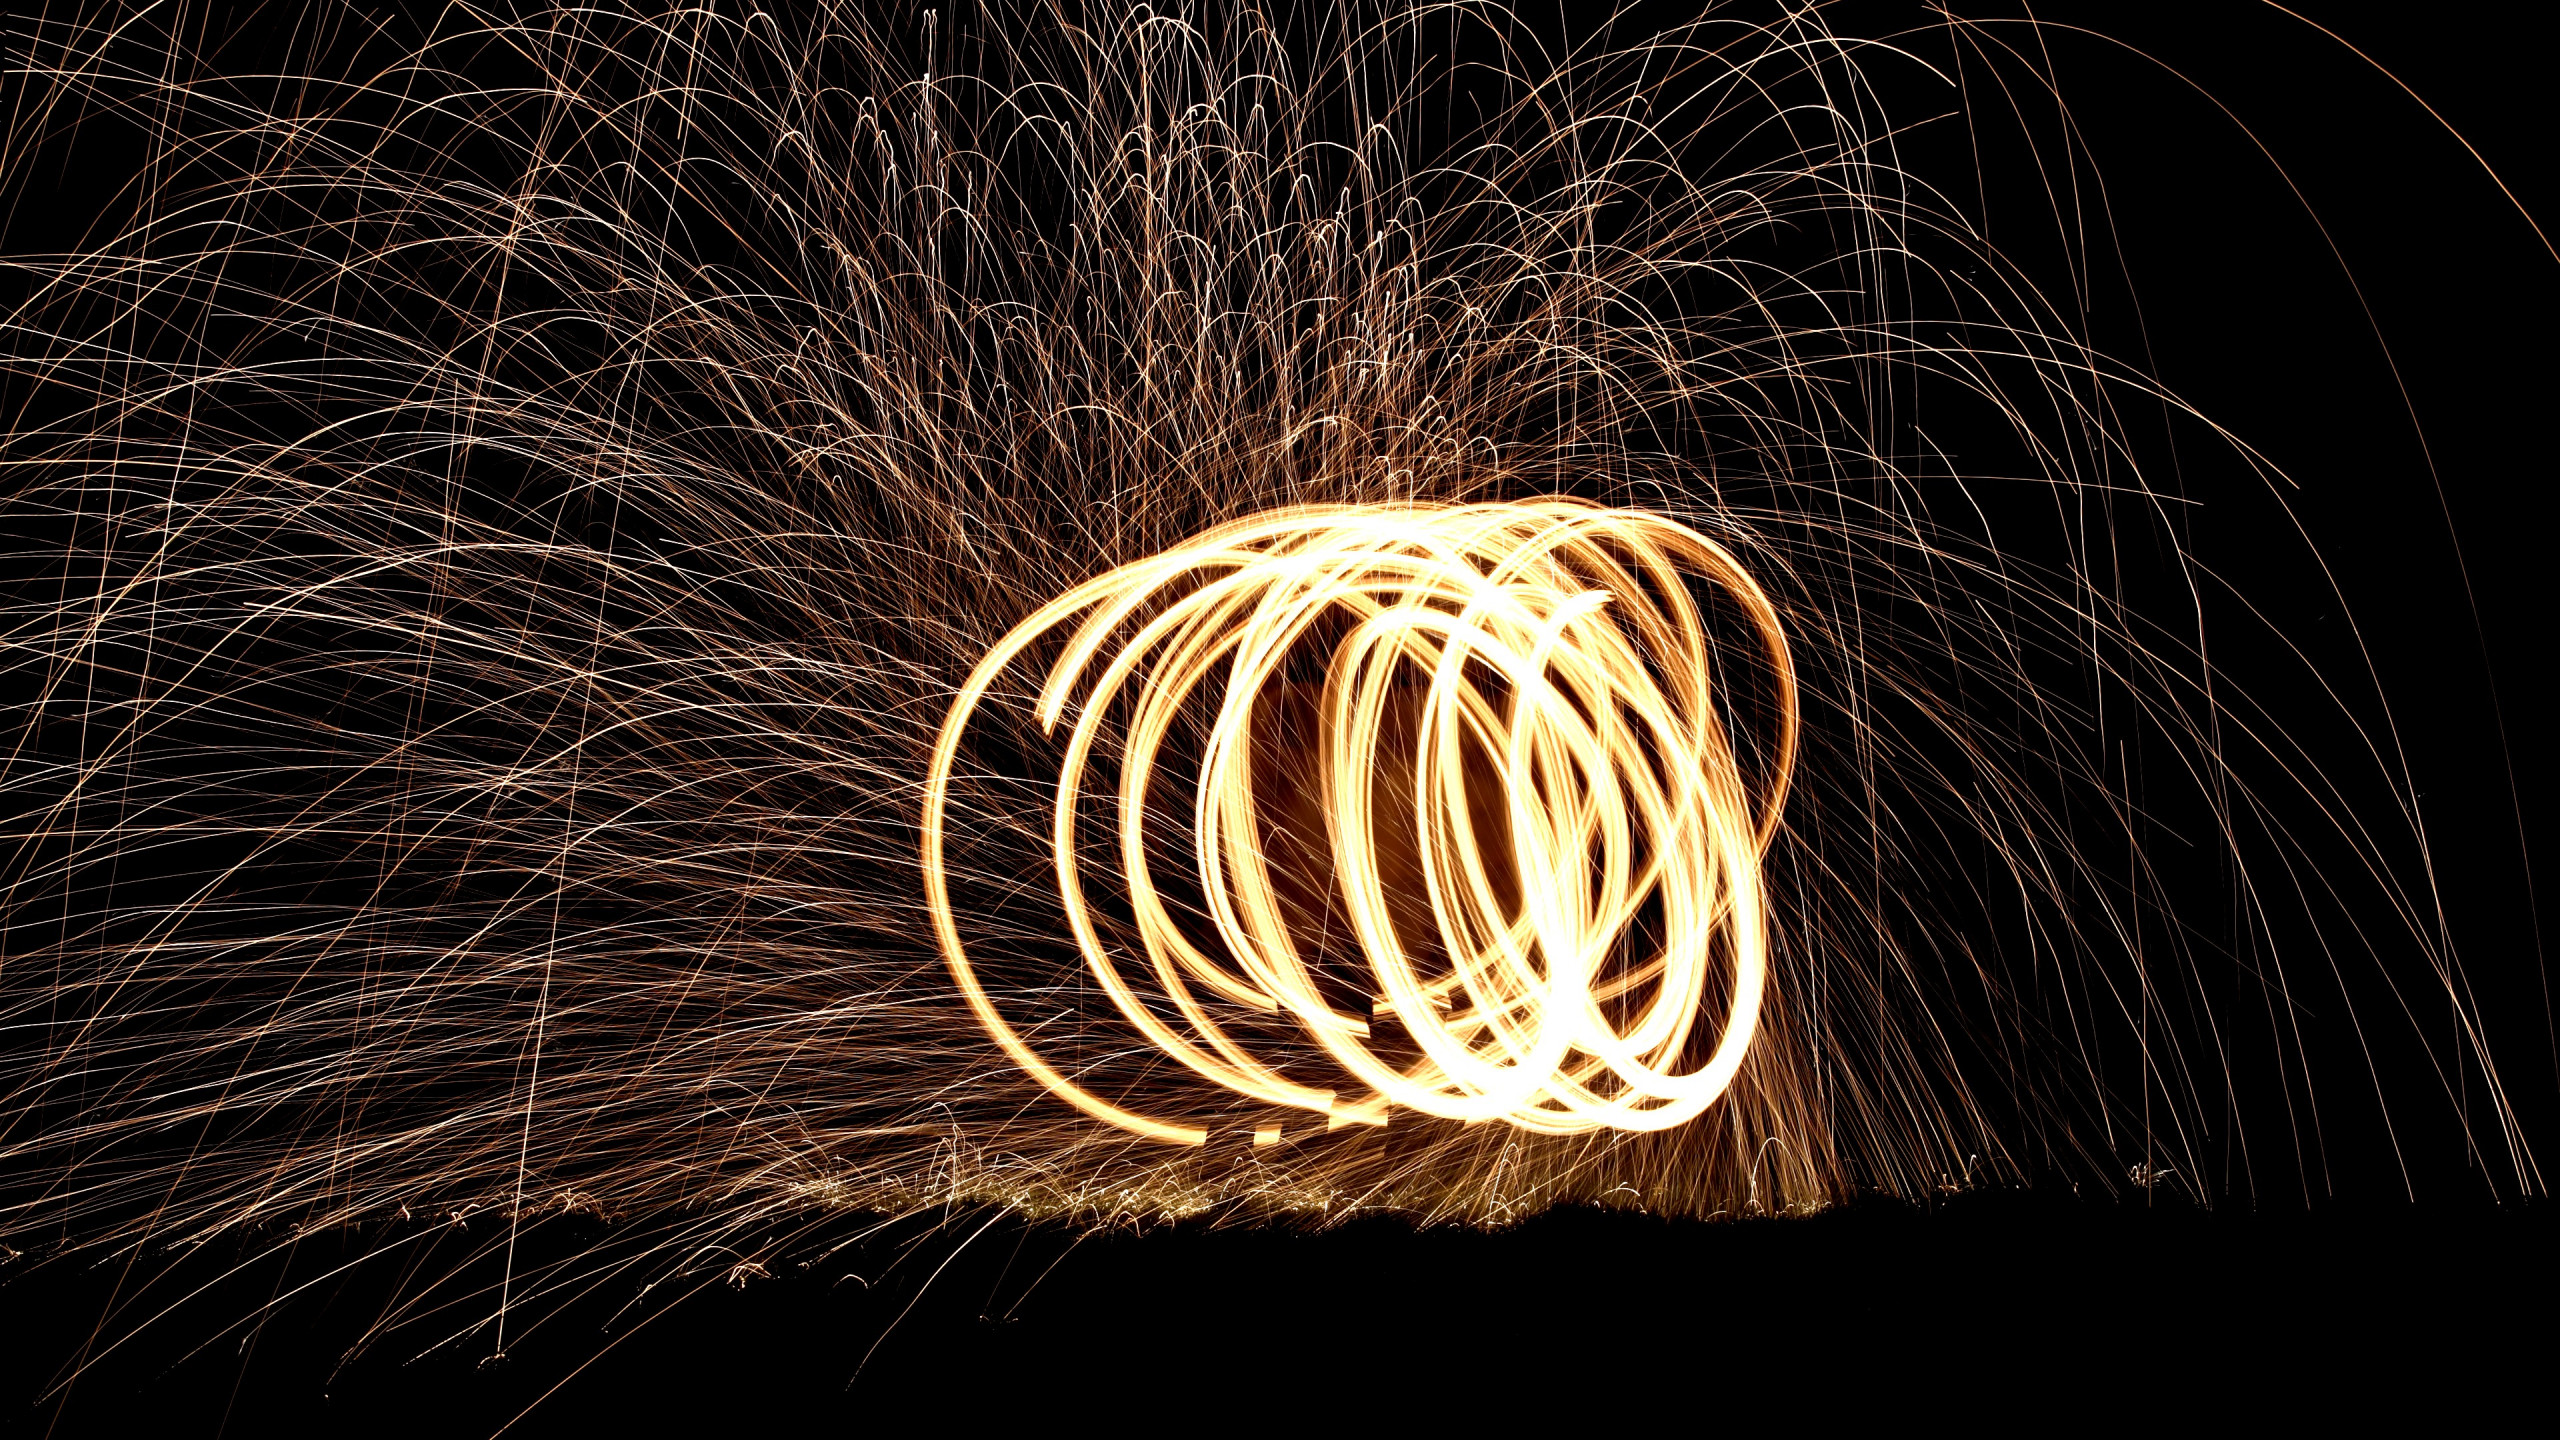 Spinning wire wool wallpaper 2560x1440